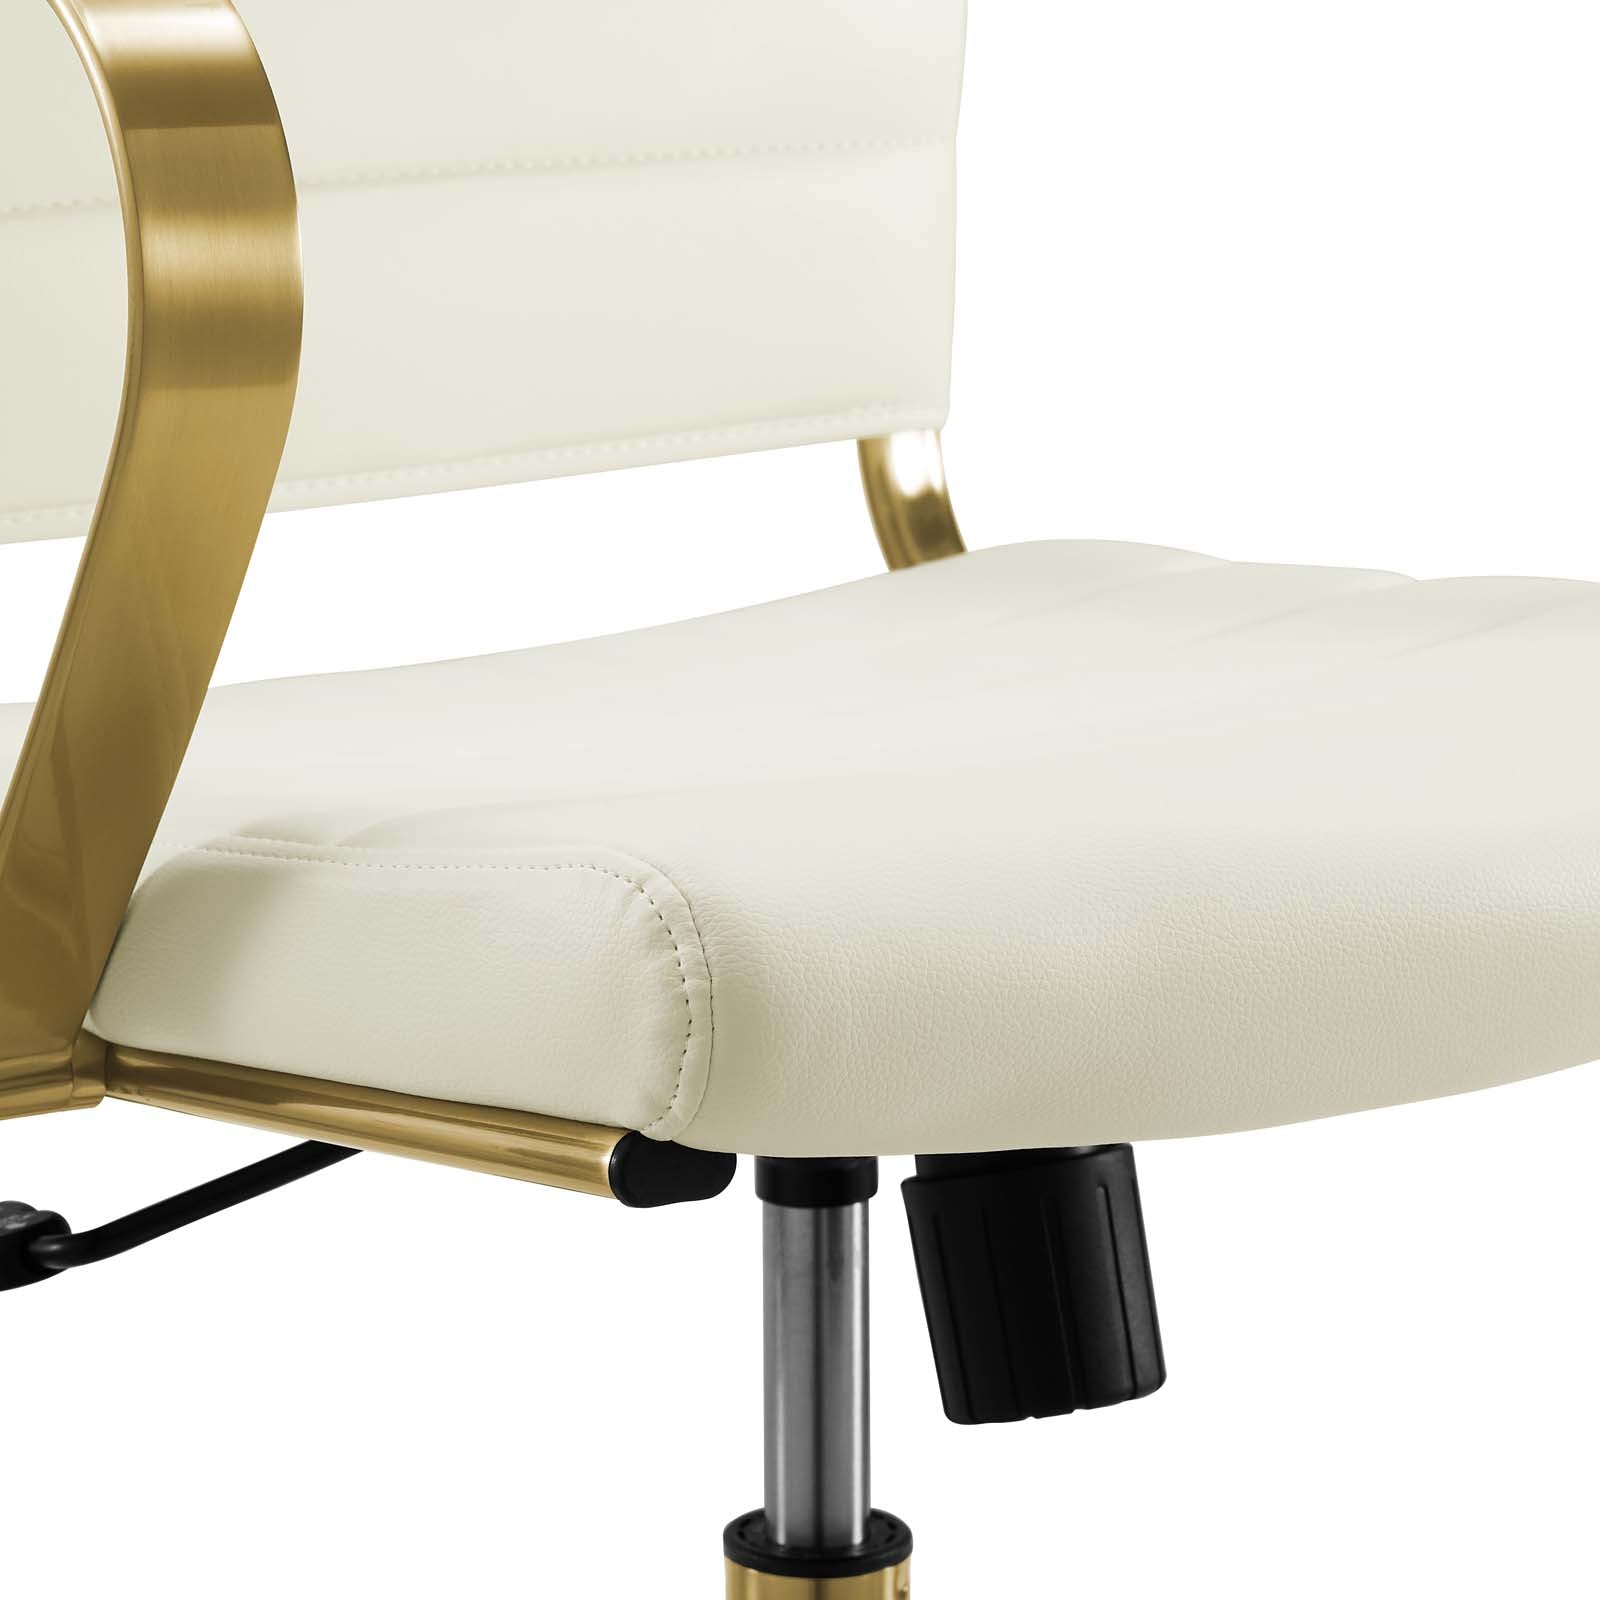 Jive Mid Back Faux Leather Office Chair - Off White/Gold